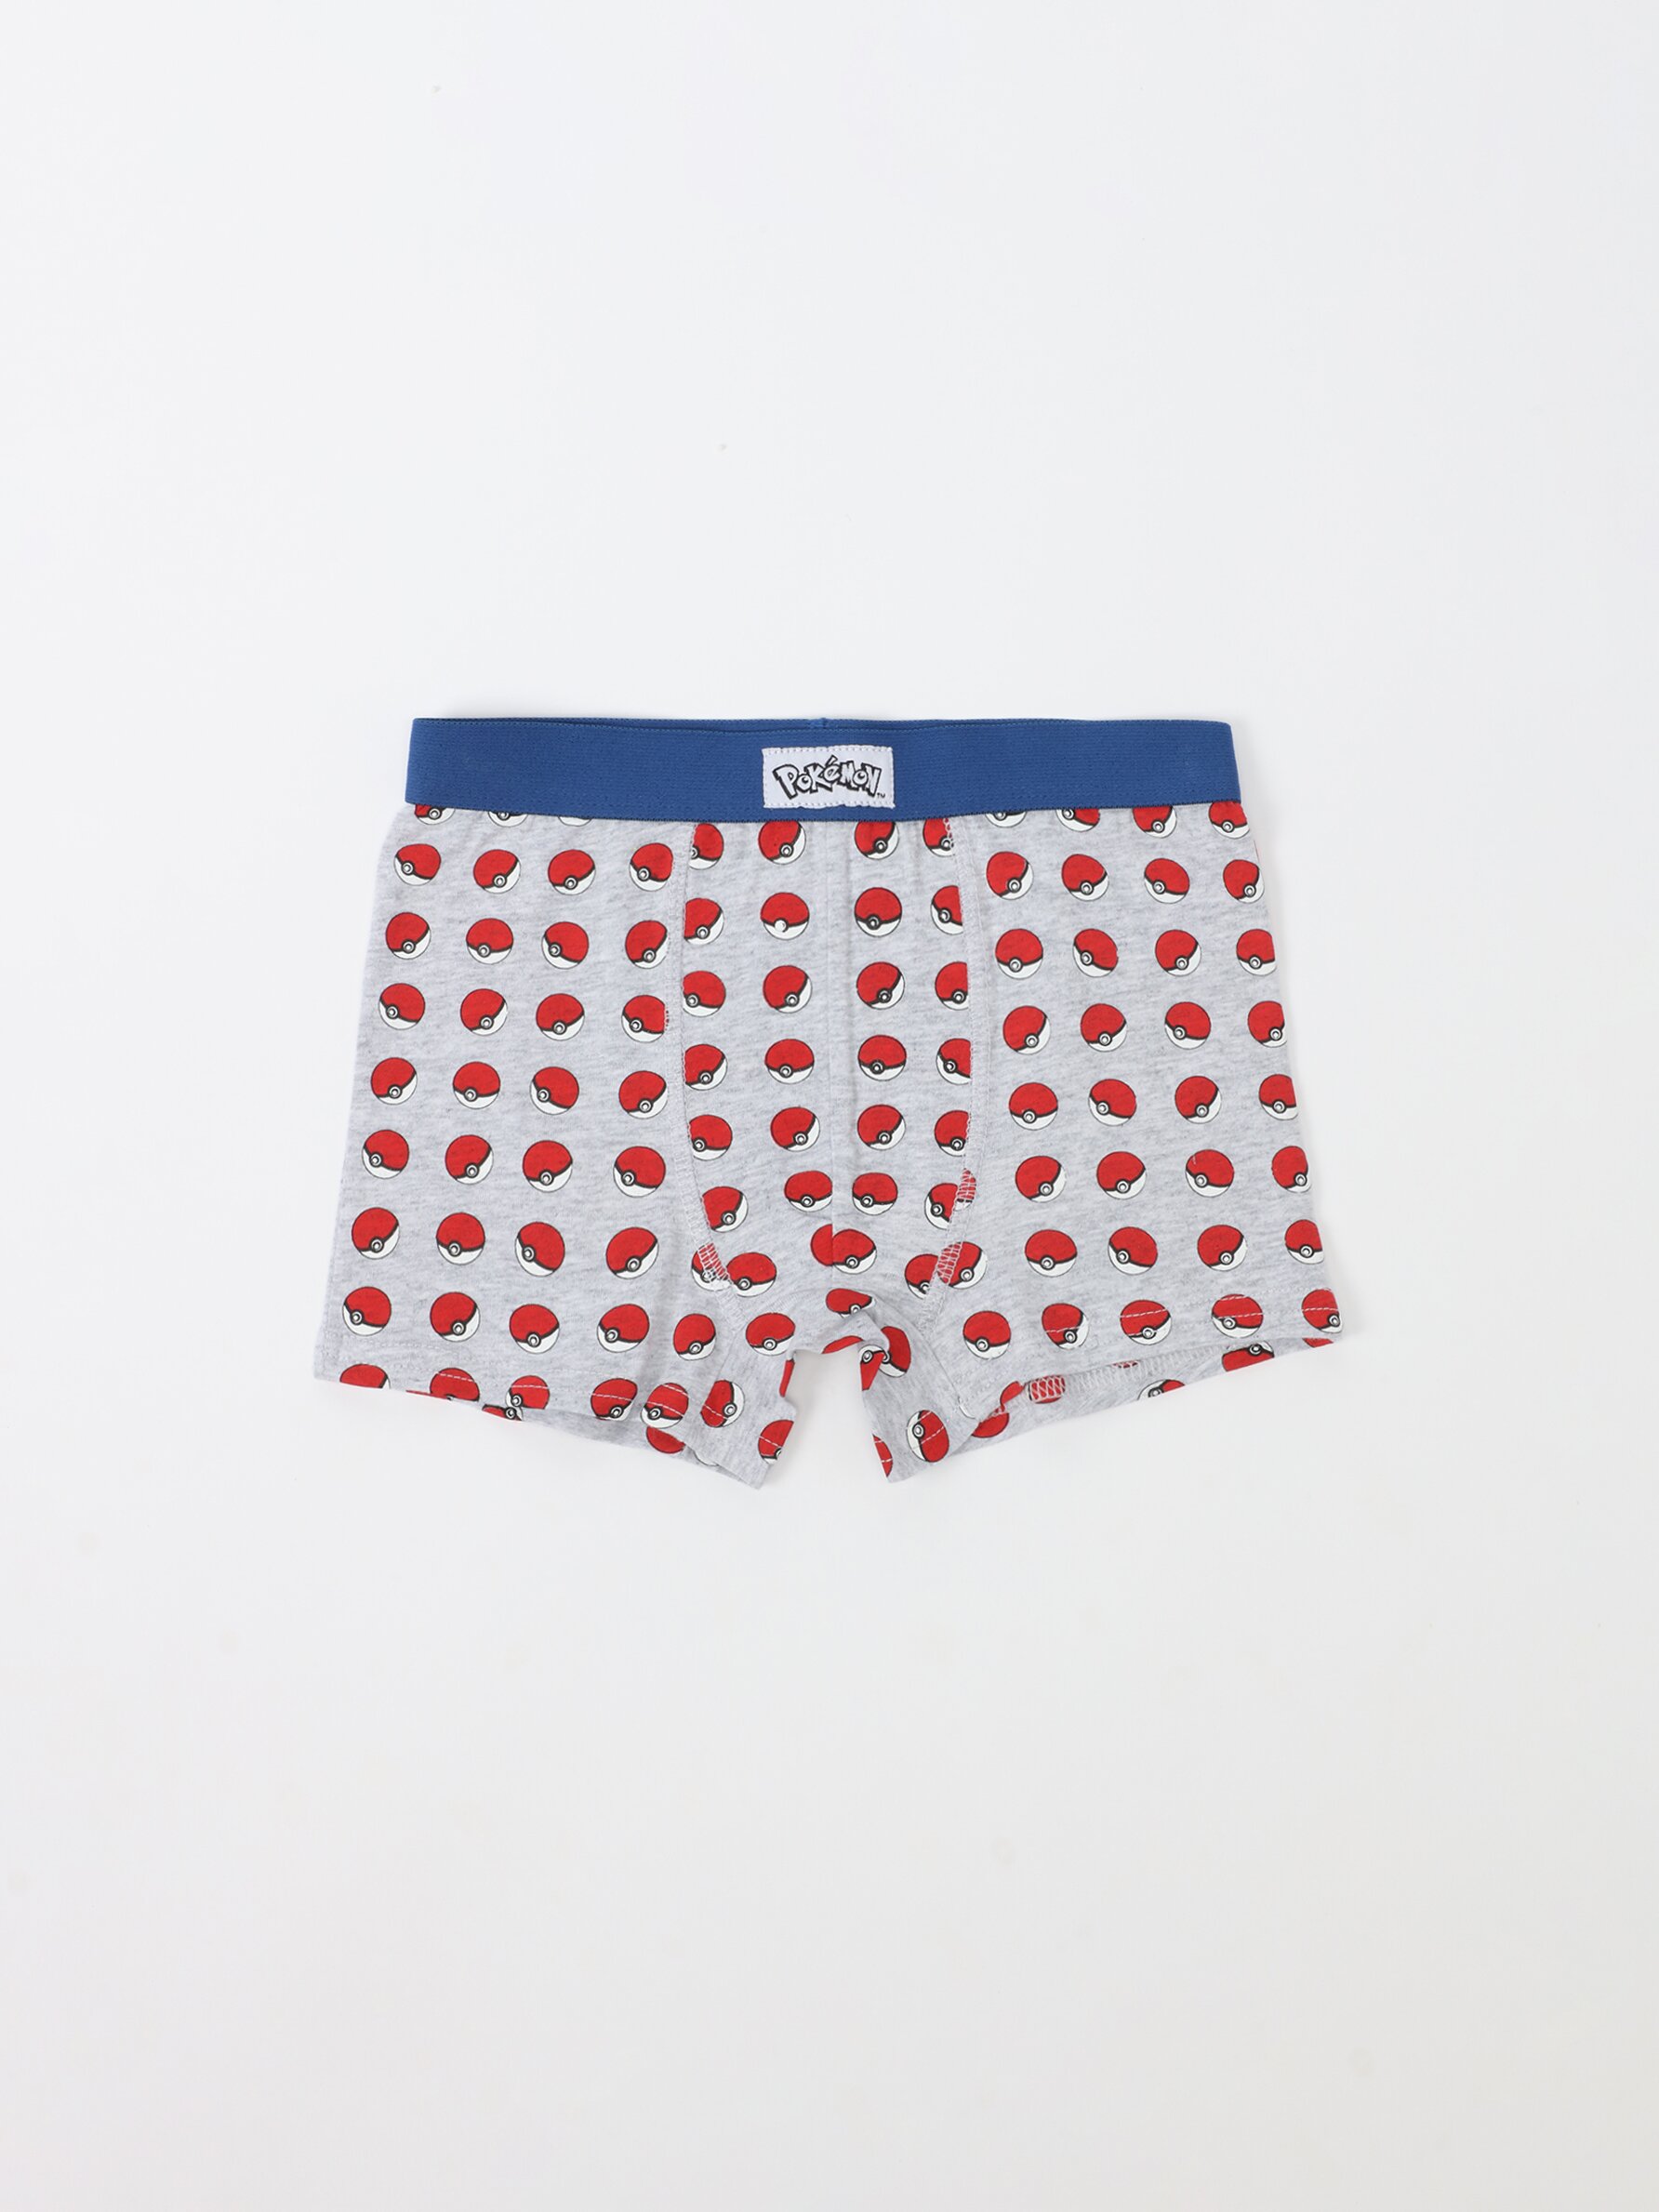 Pack of 3 pairs of Pokémon™ printed boxers - Collabs - CLOTHING